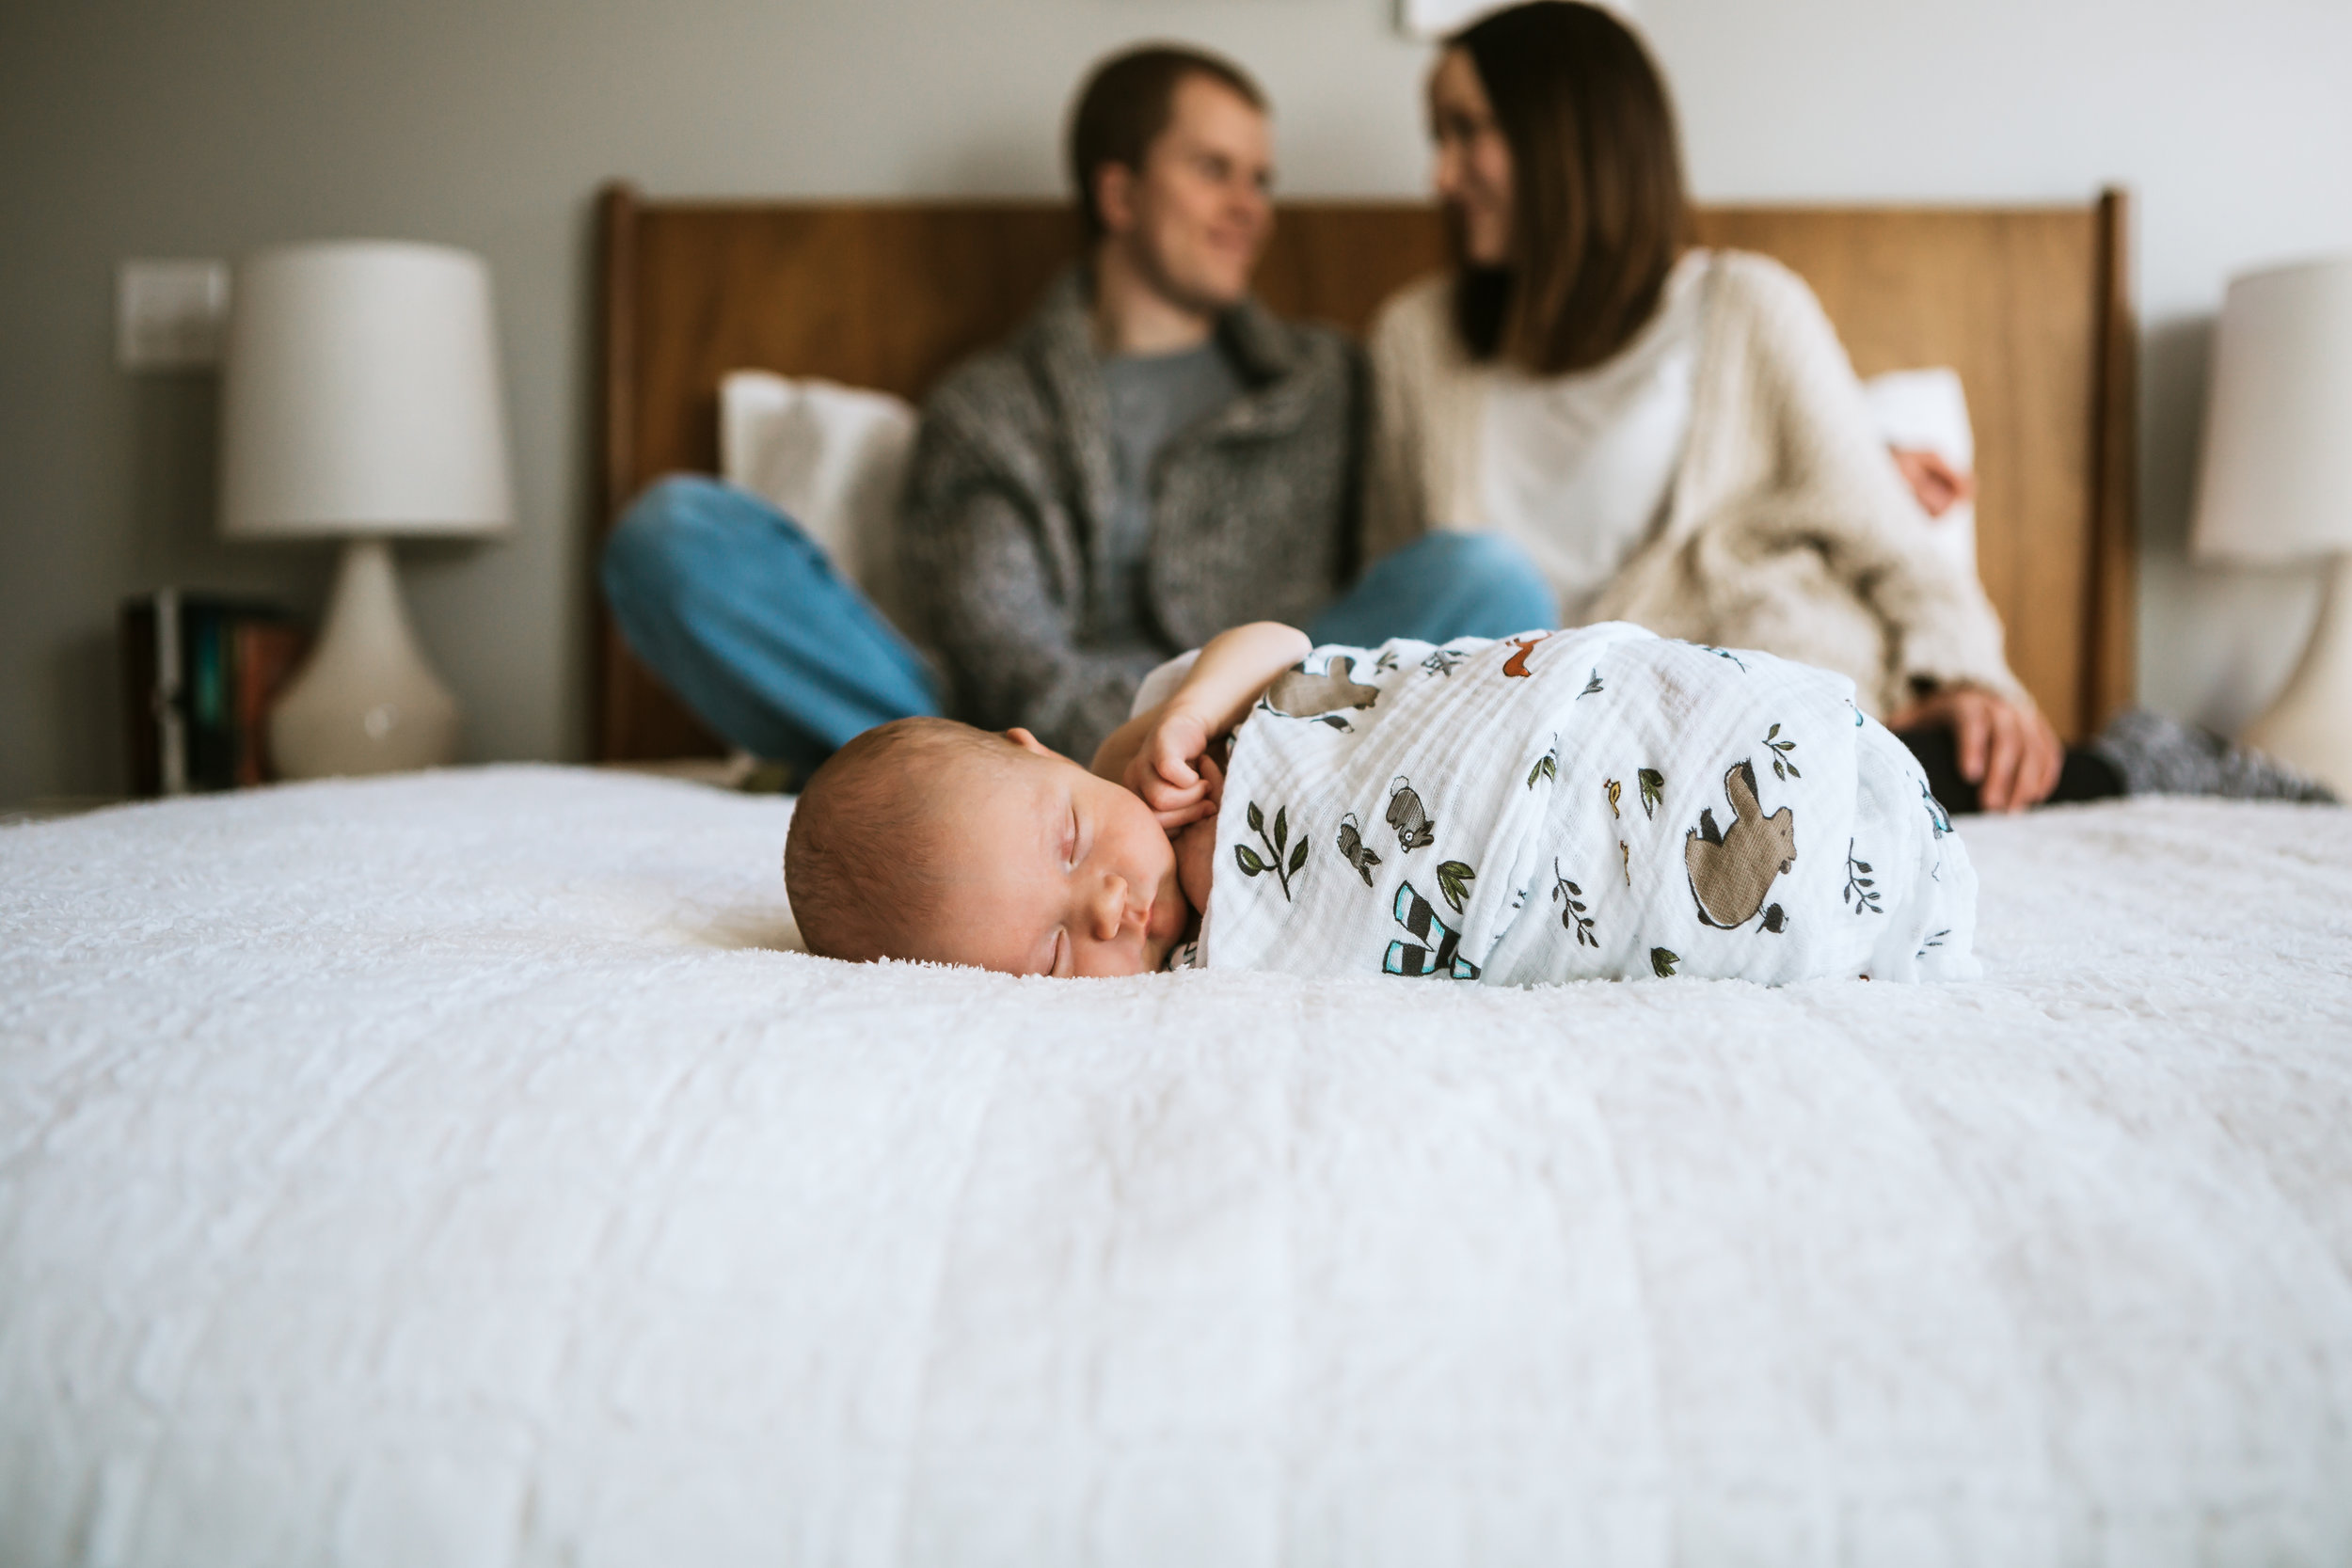  Close up of baby on the bed with mom and dad sitting on the bed behind him #tealawardphotography #texasnewbornphotographysession #amarillophotographer #amarilloenewbornphotographer #emotionalphotography #lifestylephotography #inhomesession #lifestyles #newbaby #newfamilyofthree #sweetbaby #nurseryphotos 